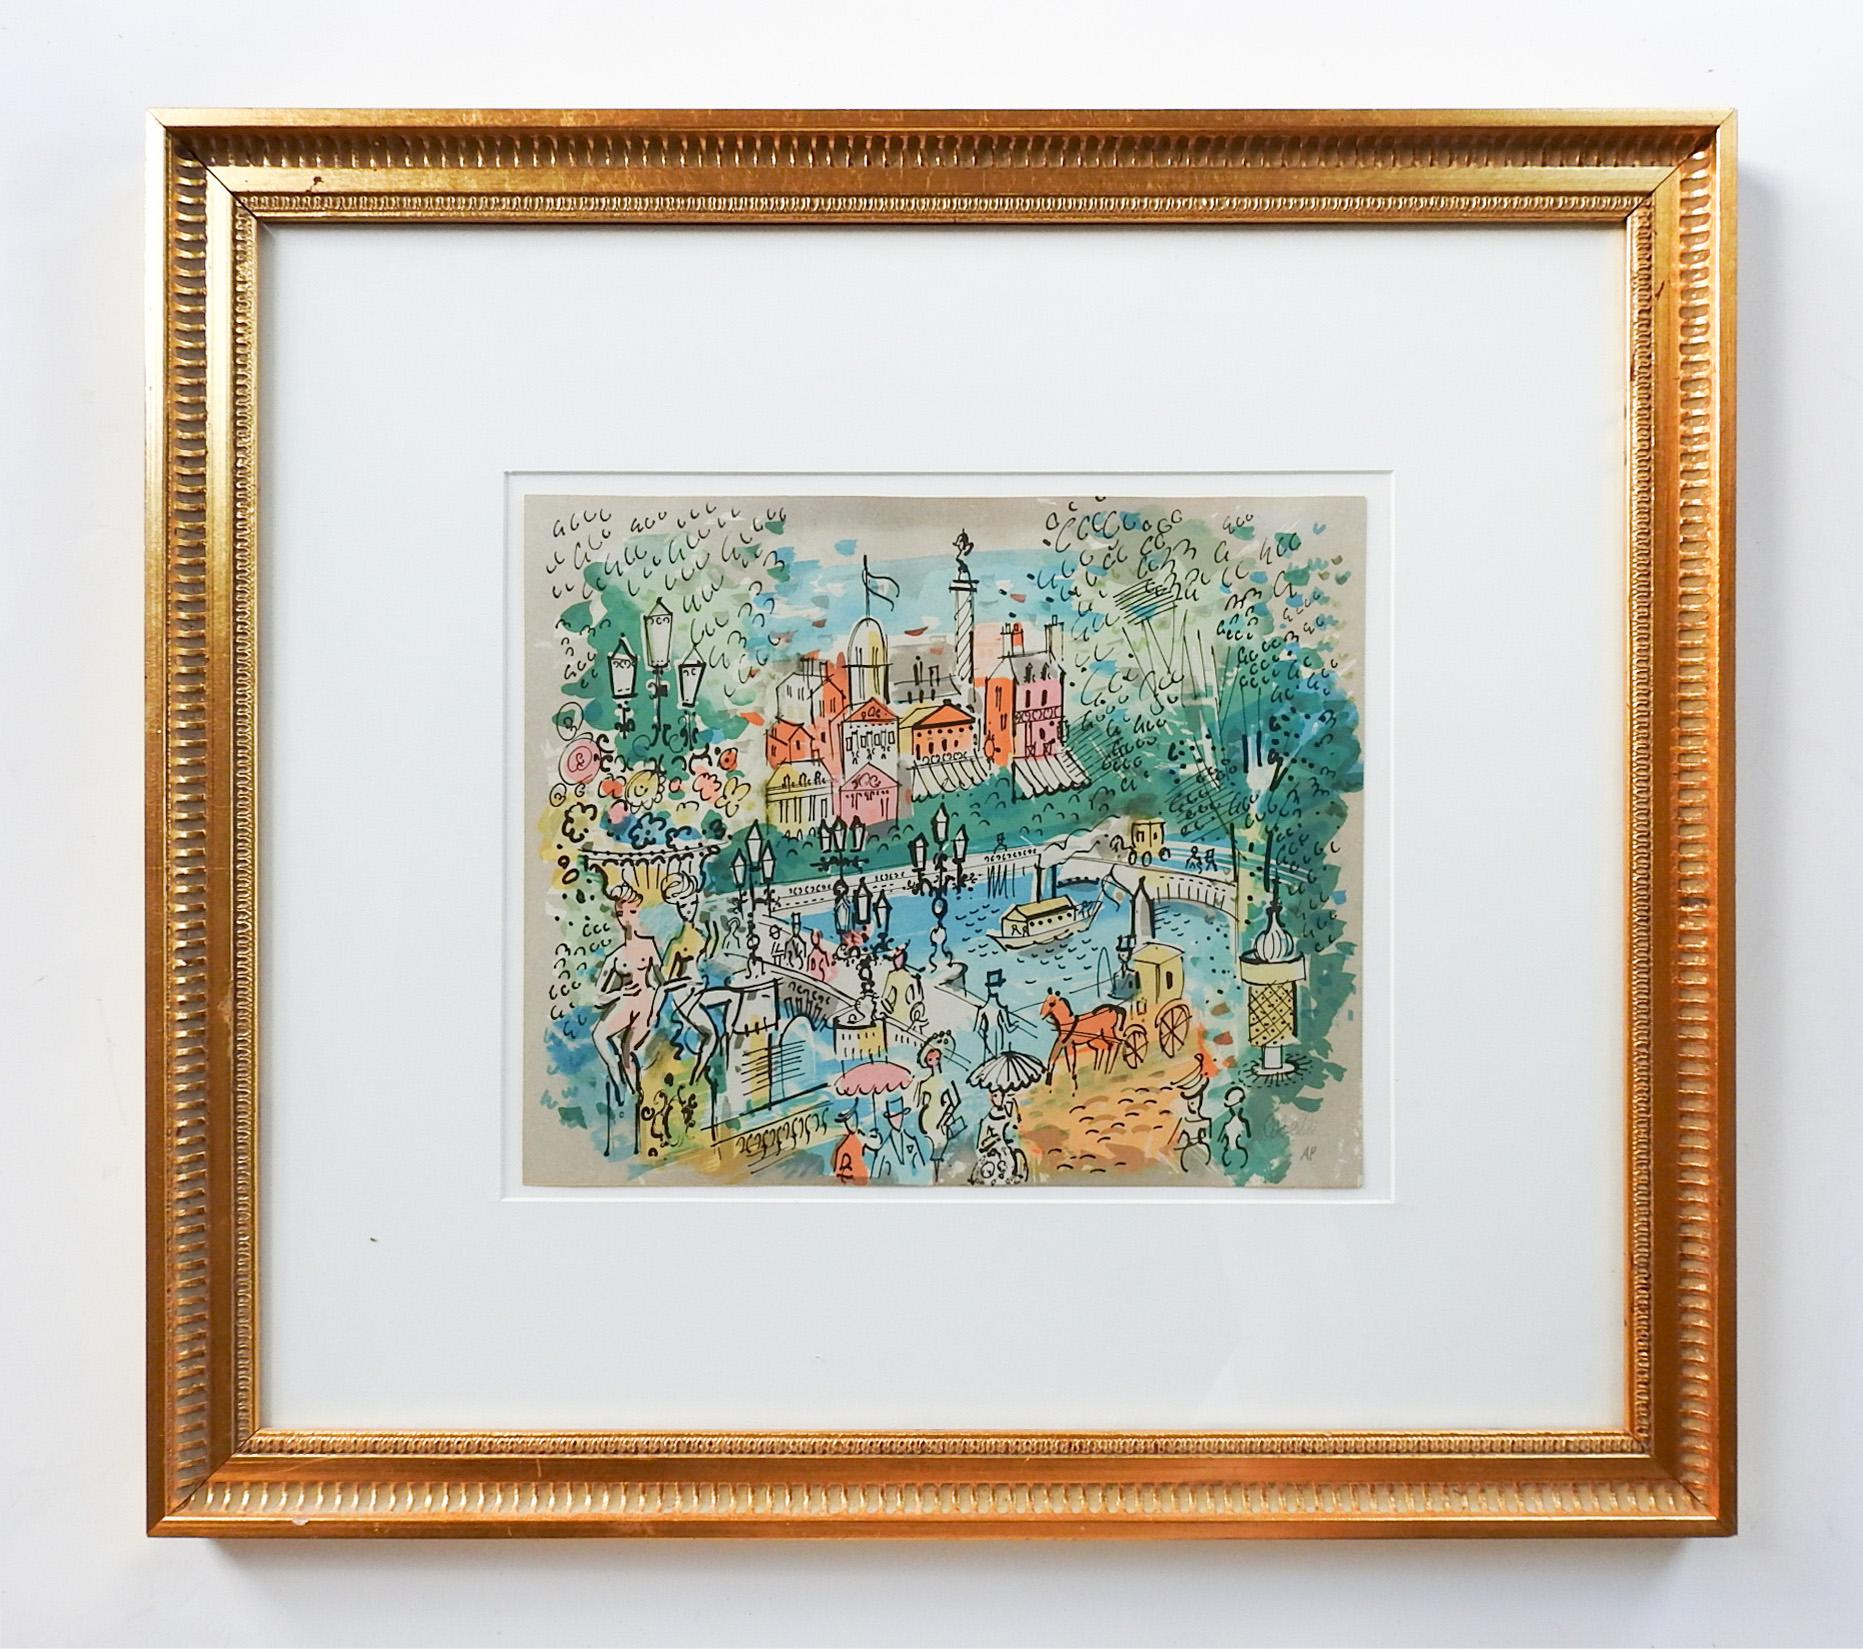 Le Pont by Charles Cobelle (1902-1994) France, lithograph on paper. Signed Artist Proof in pencil lower right corner. Displayed matted under glass in giltwood frame, opening 11